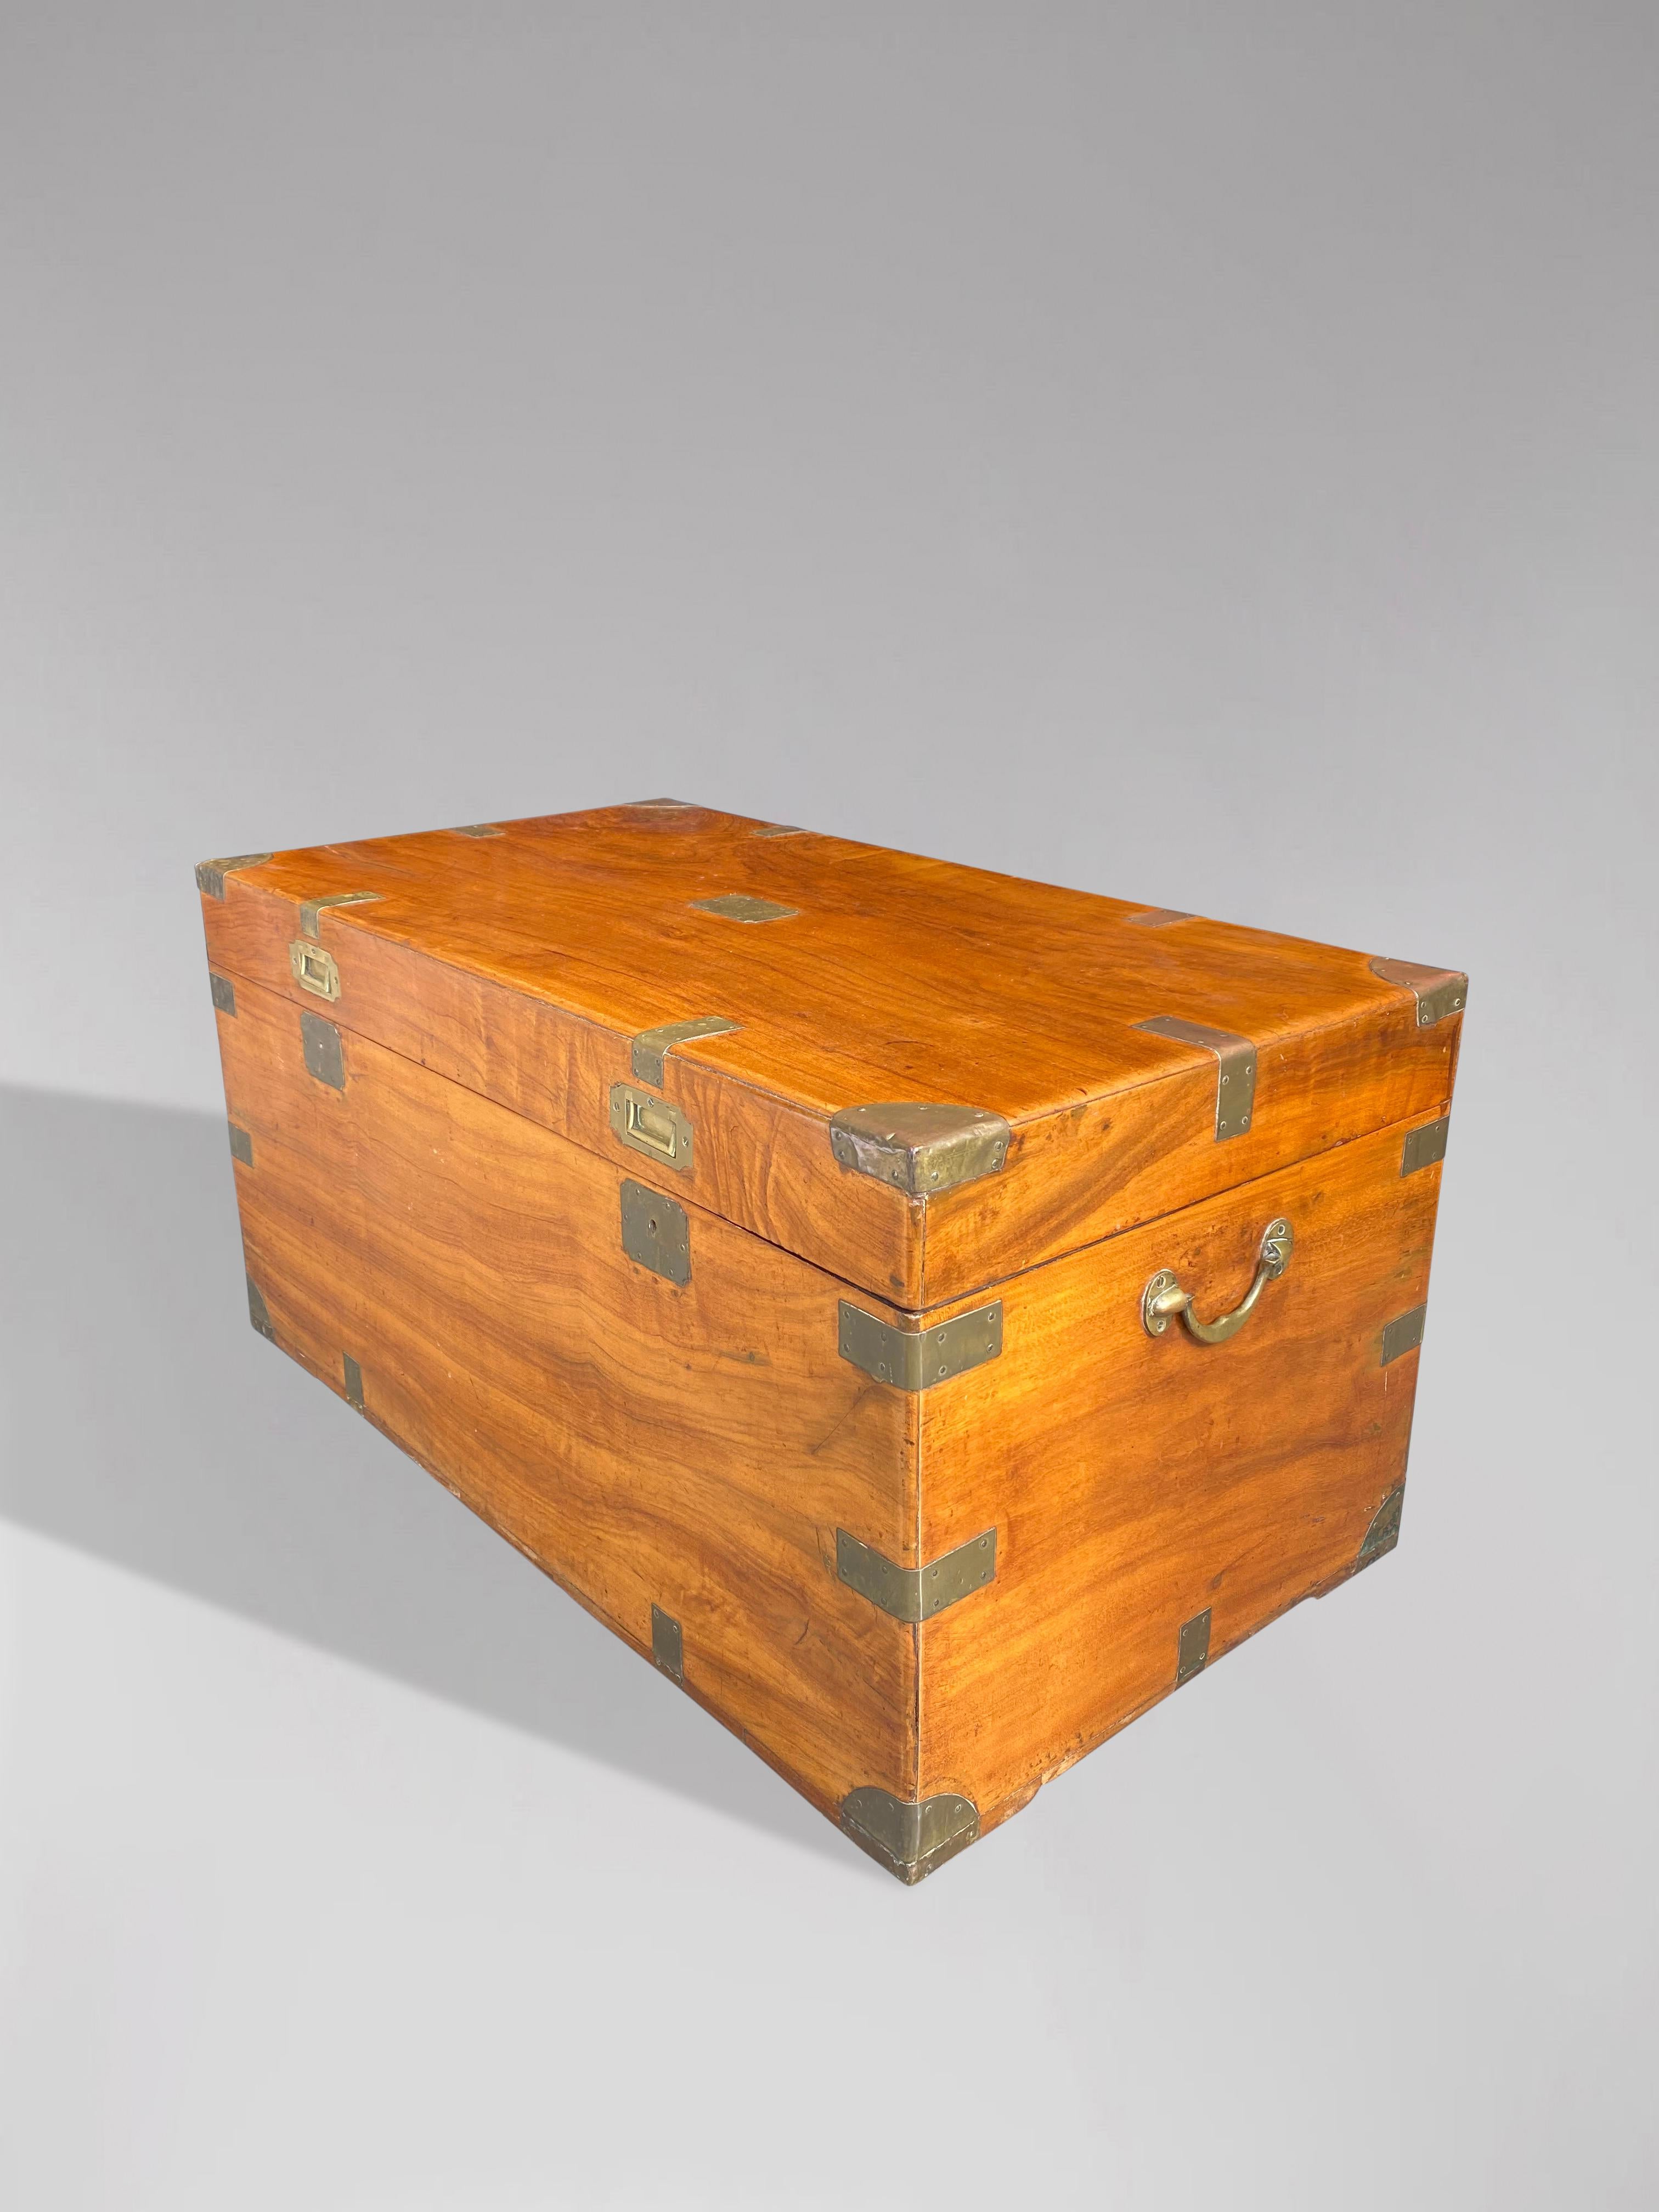 Hand-Crafted Late 19th Century Camphor Wood Trunk or Chest